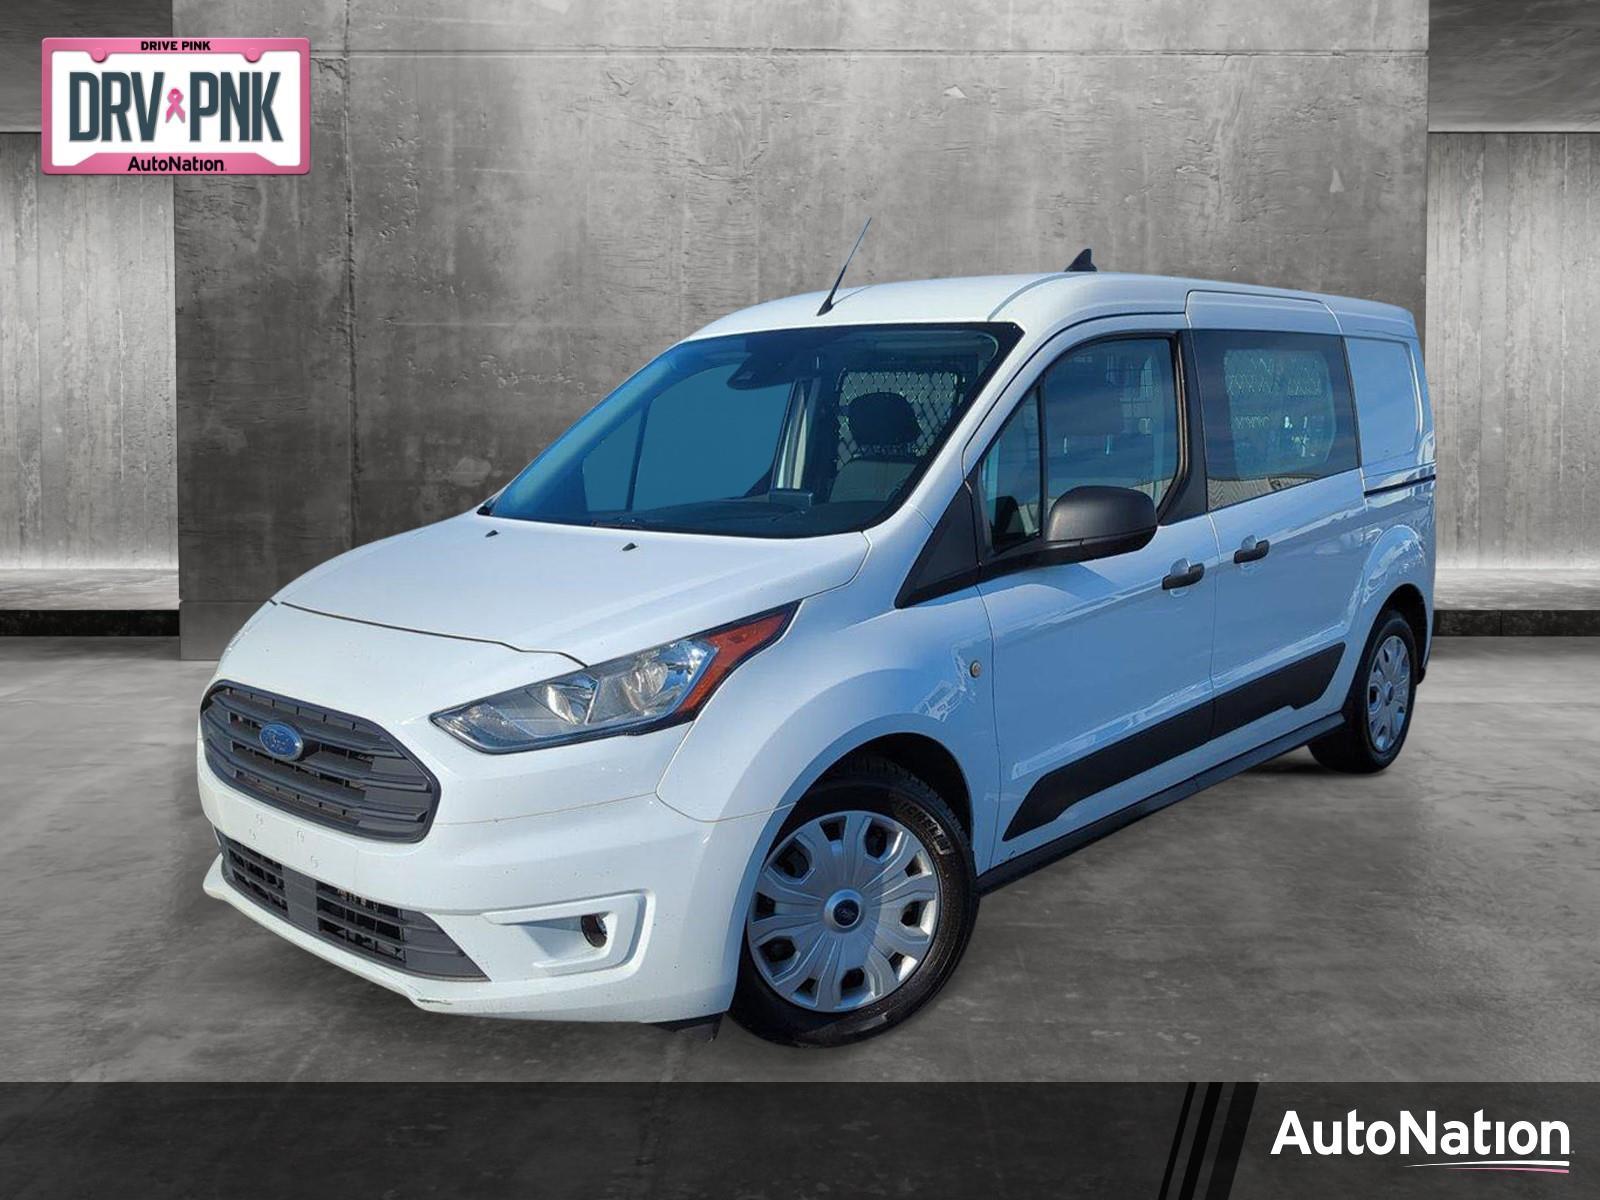 USED 2020 Ford Transit Connect for sale in Memphis, TN, 38128 - AutoNation